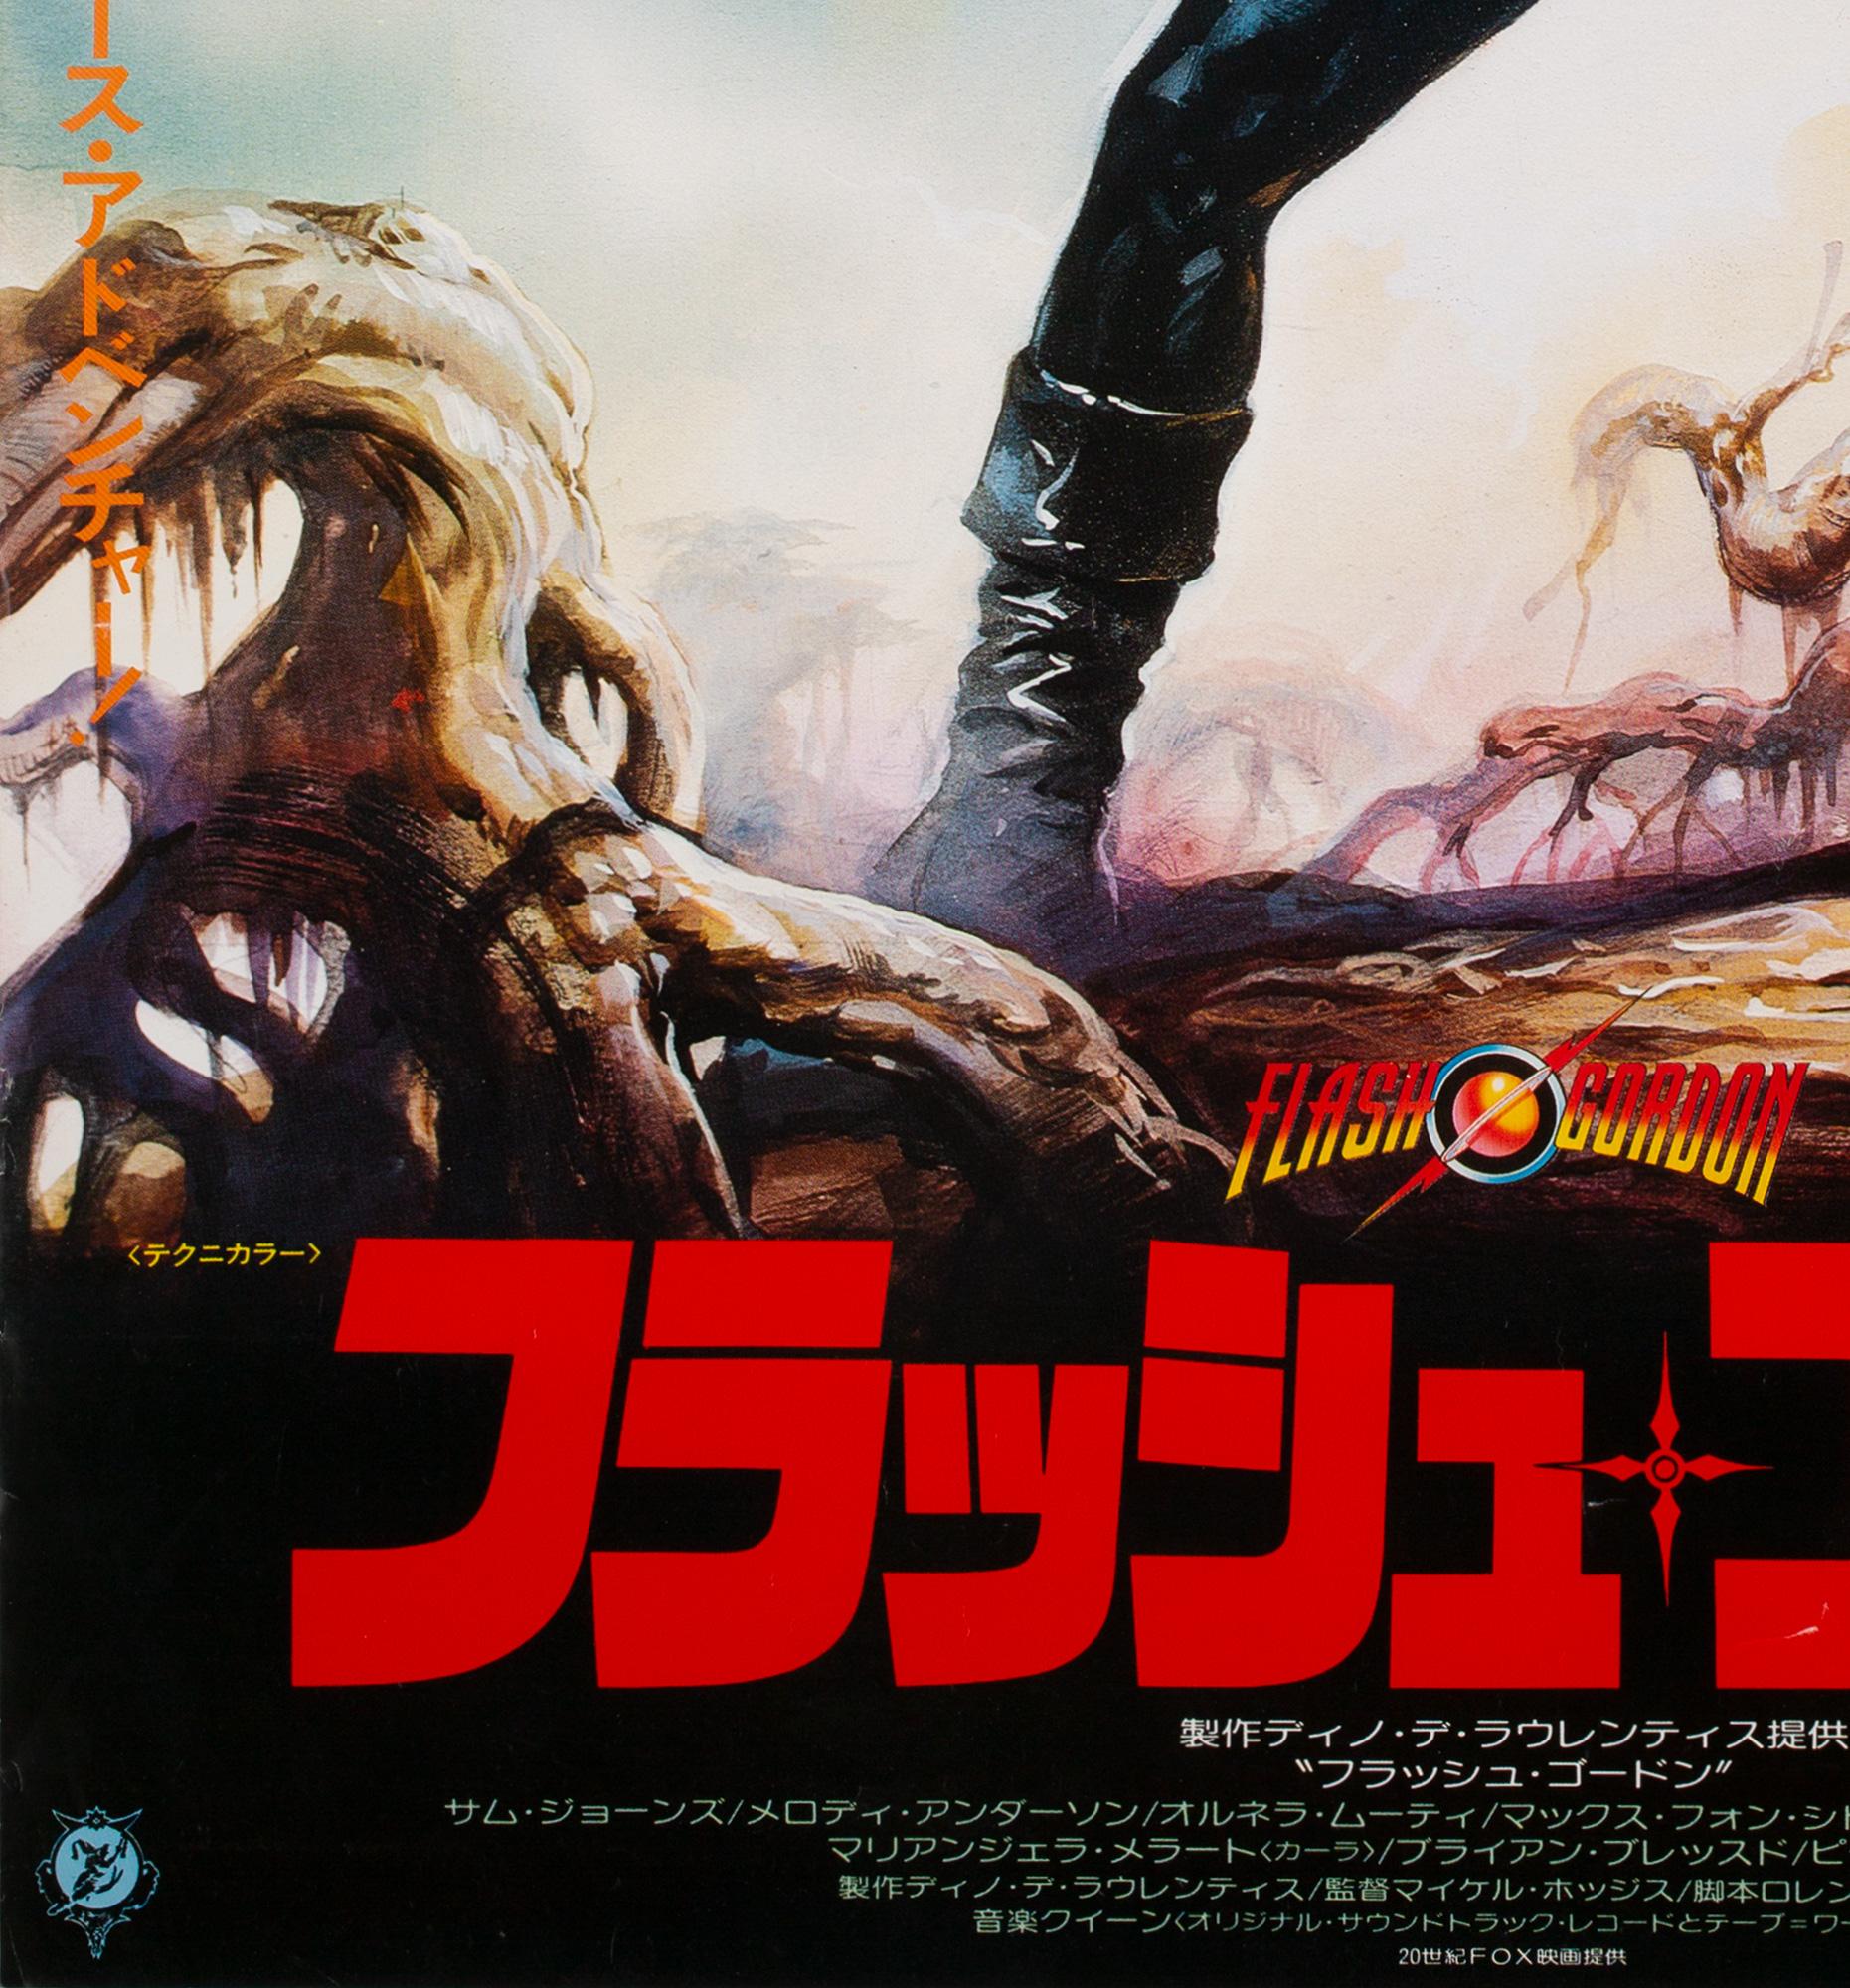 Flash Gordon 1981 Japanese RARE LARGE B1 Film Poster, Casaro In Excellent Condition In Bath, Somerset